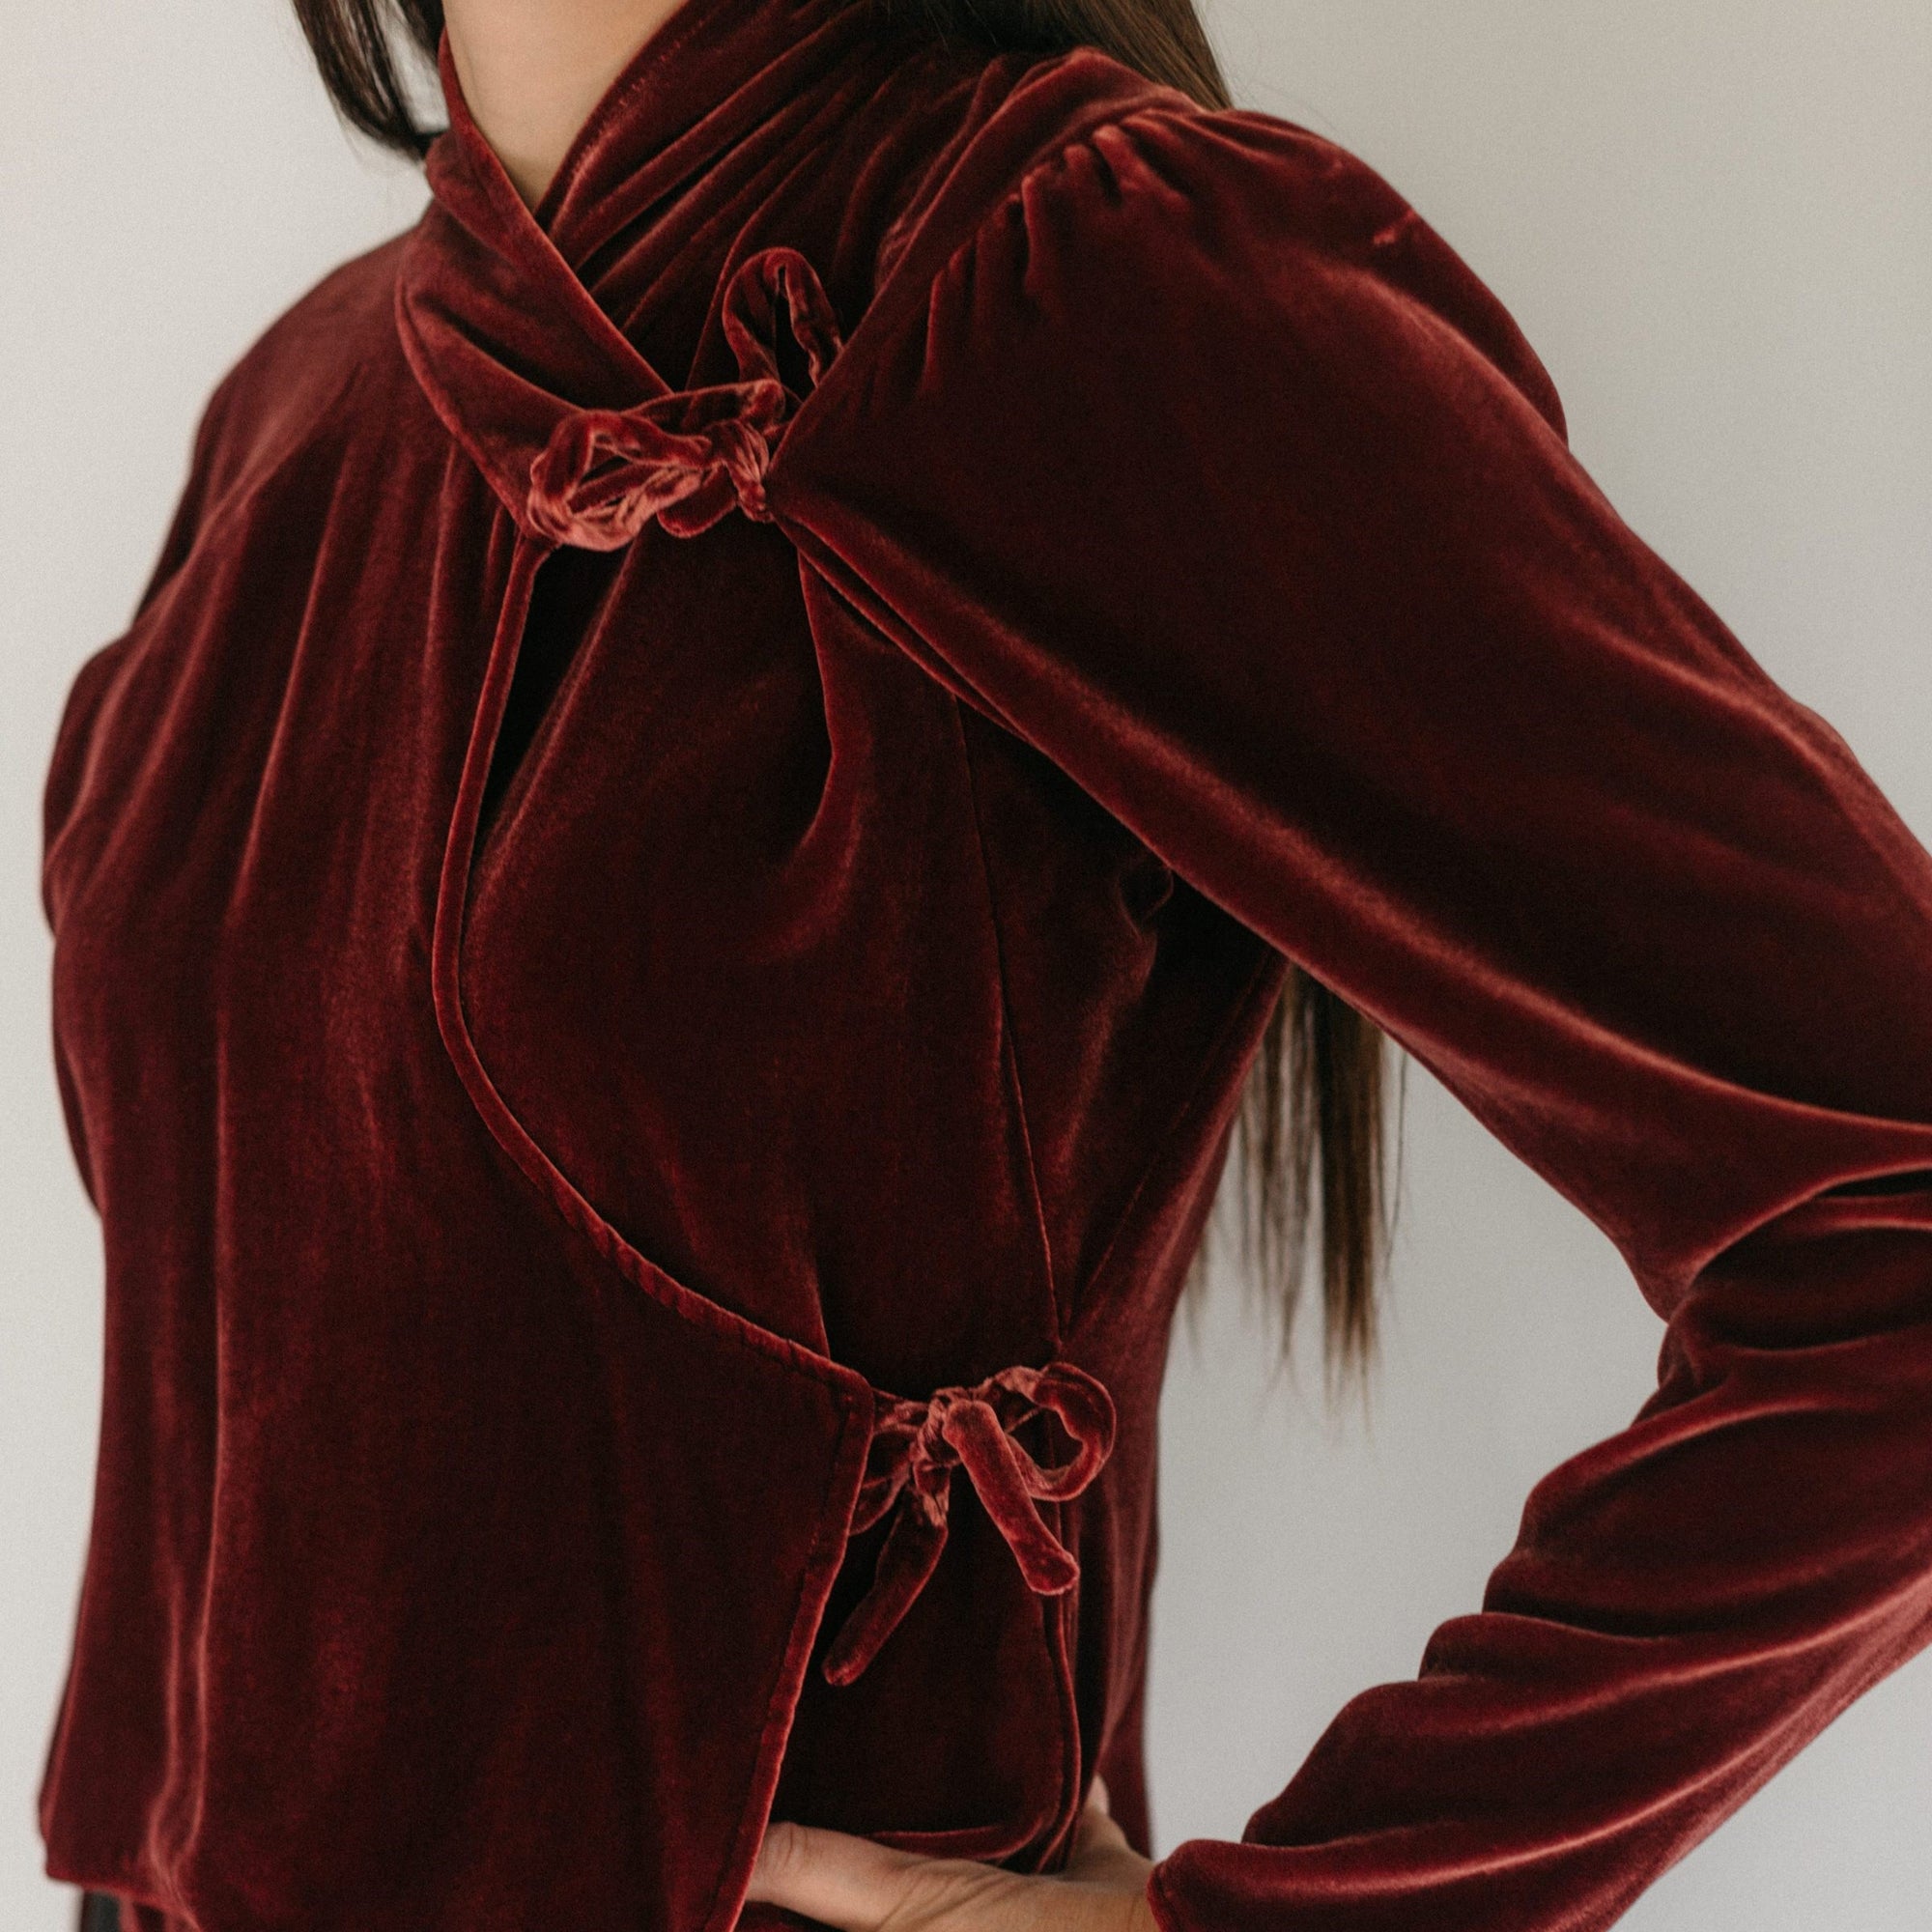 Close up of woman wearing a red velvet wrap shirt.